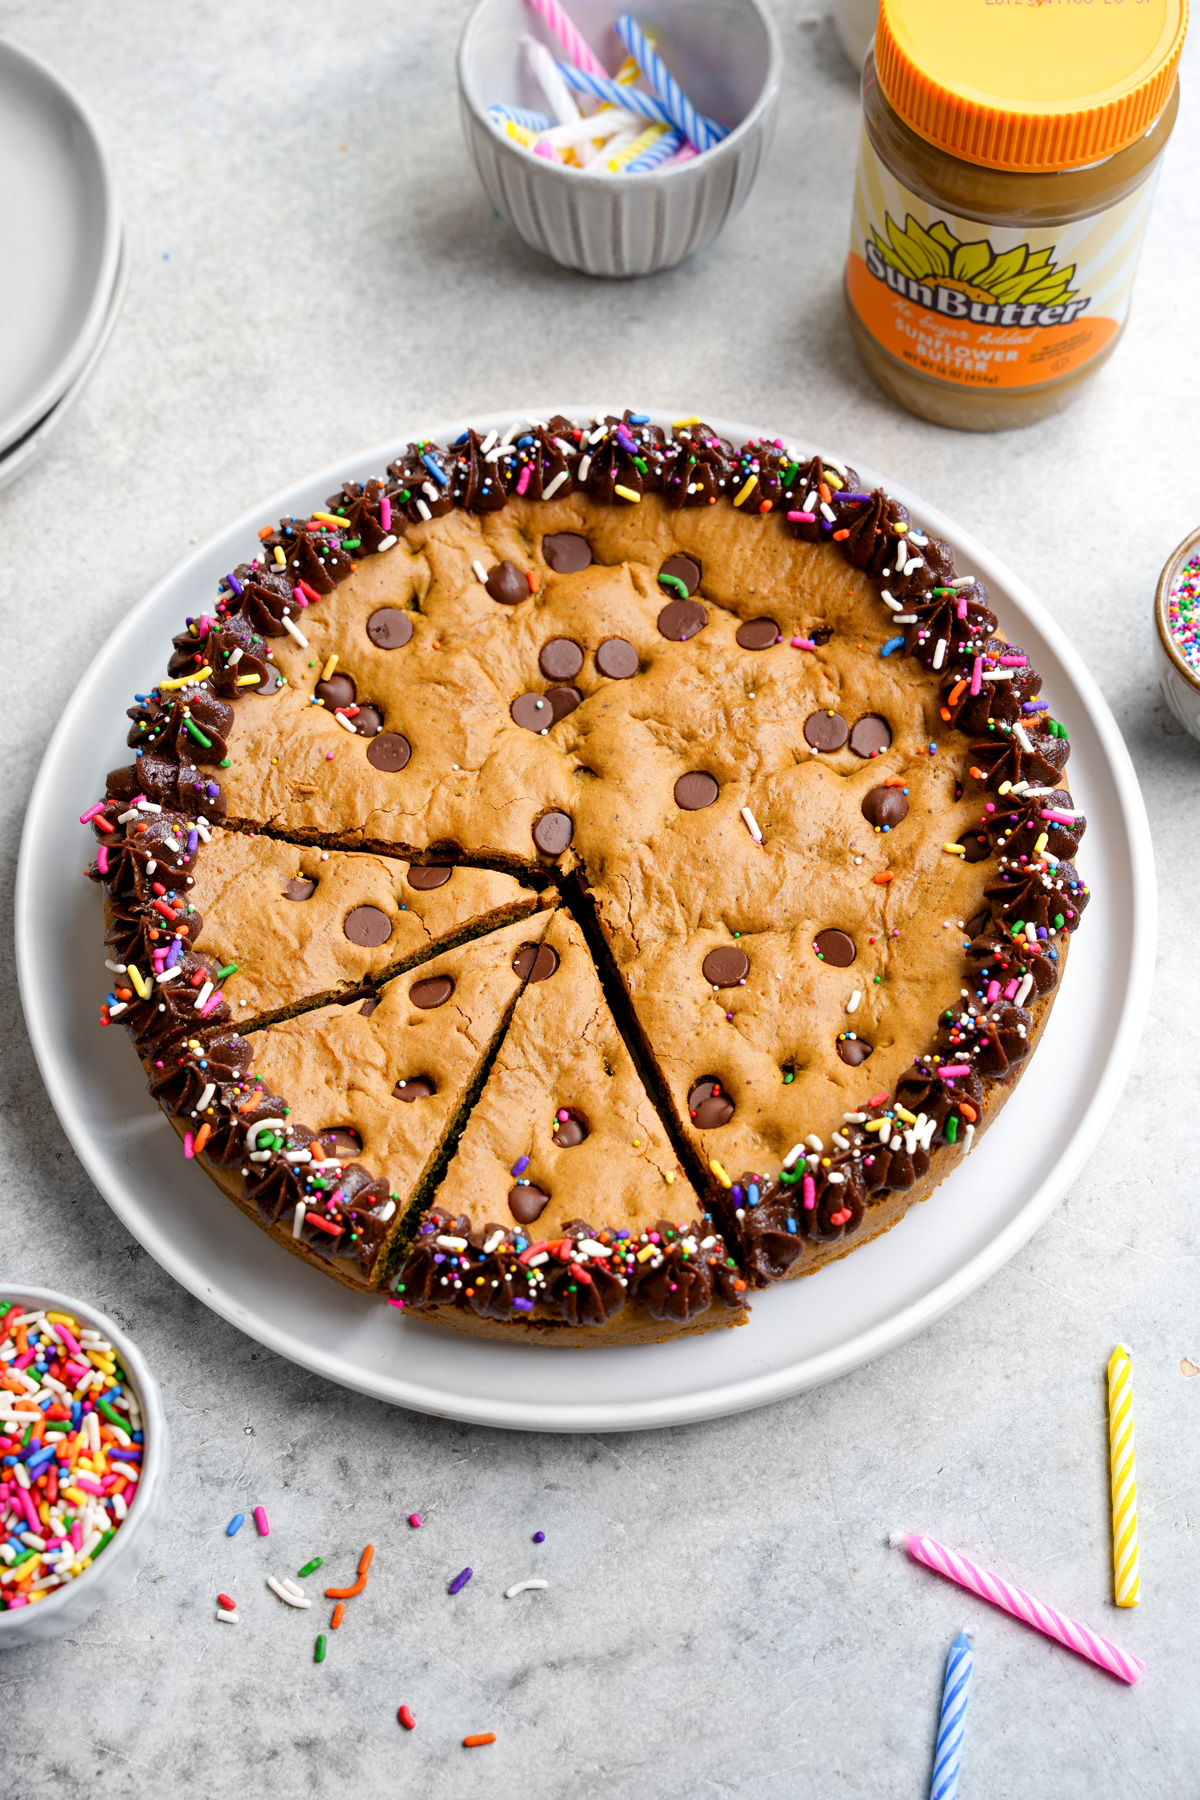 the gluten-free vegan cookie cake with the rainbow sprinkles and the sunbutter